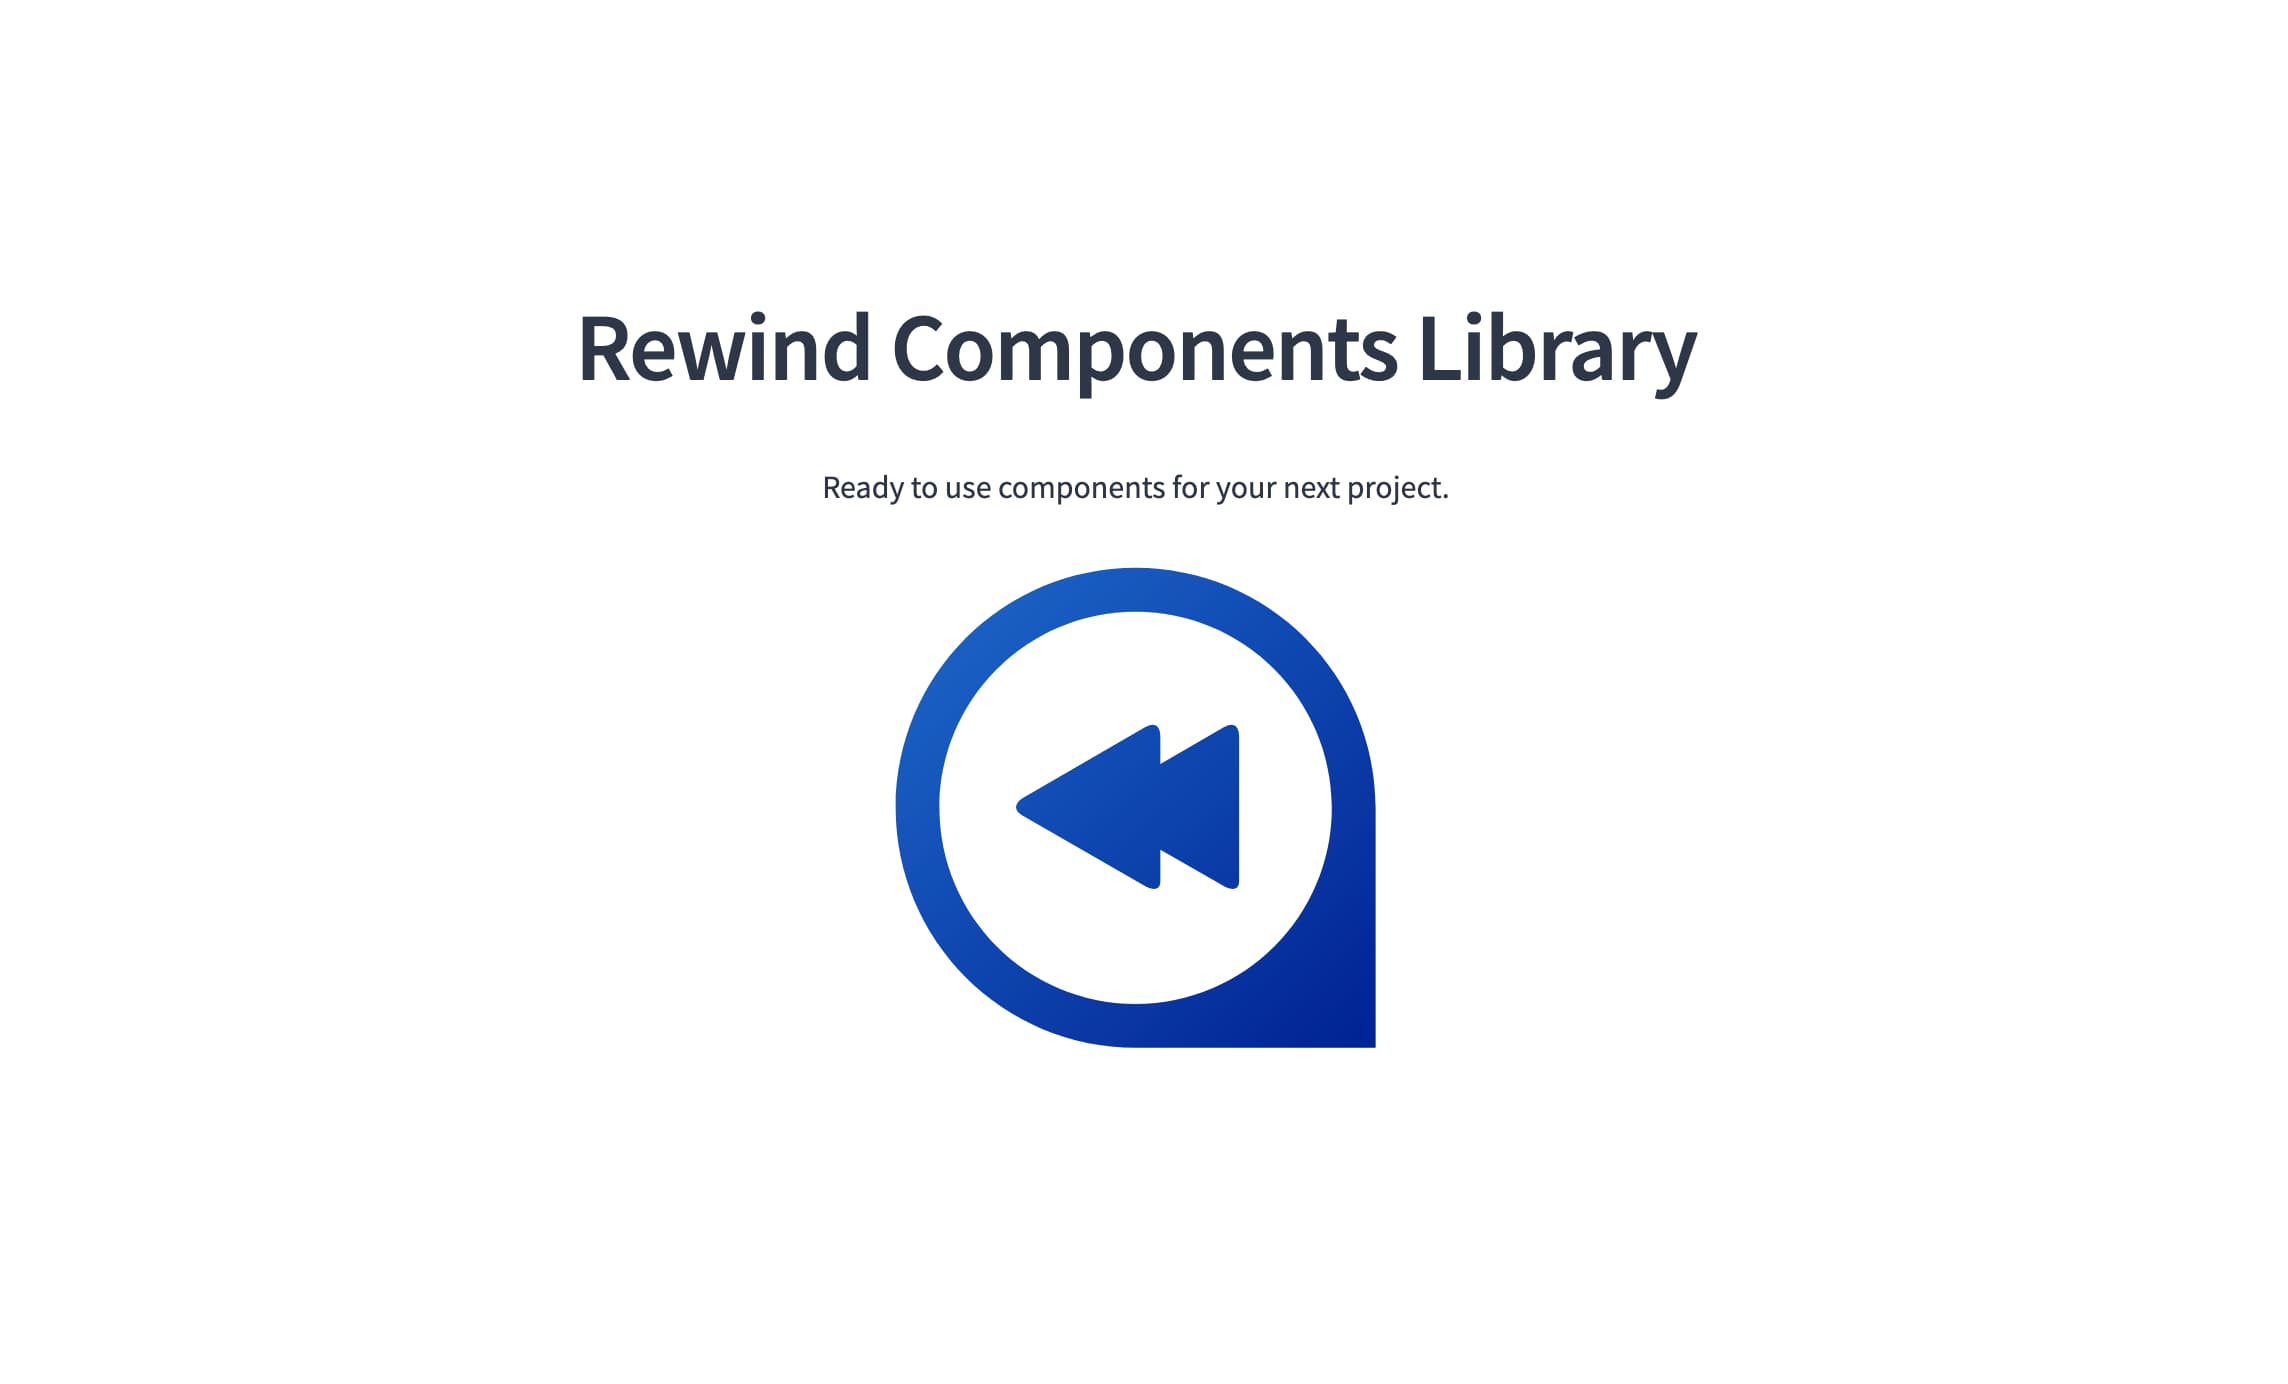 Rewind Components Library